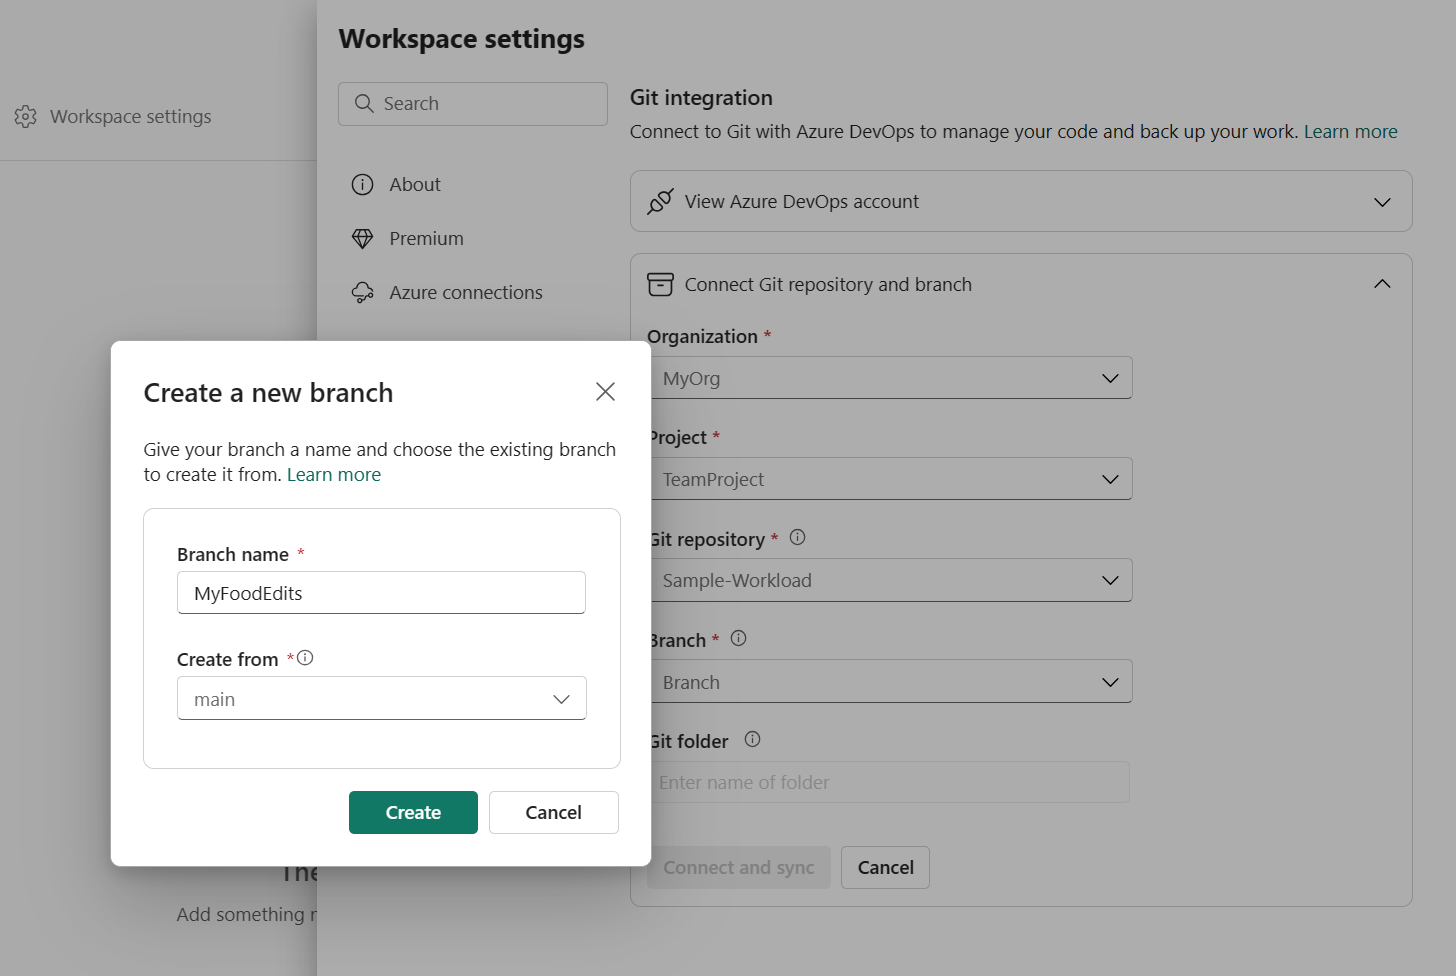 Screenshot of workspace settings window with create new branch.